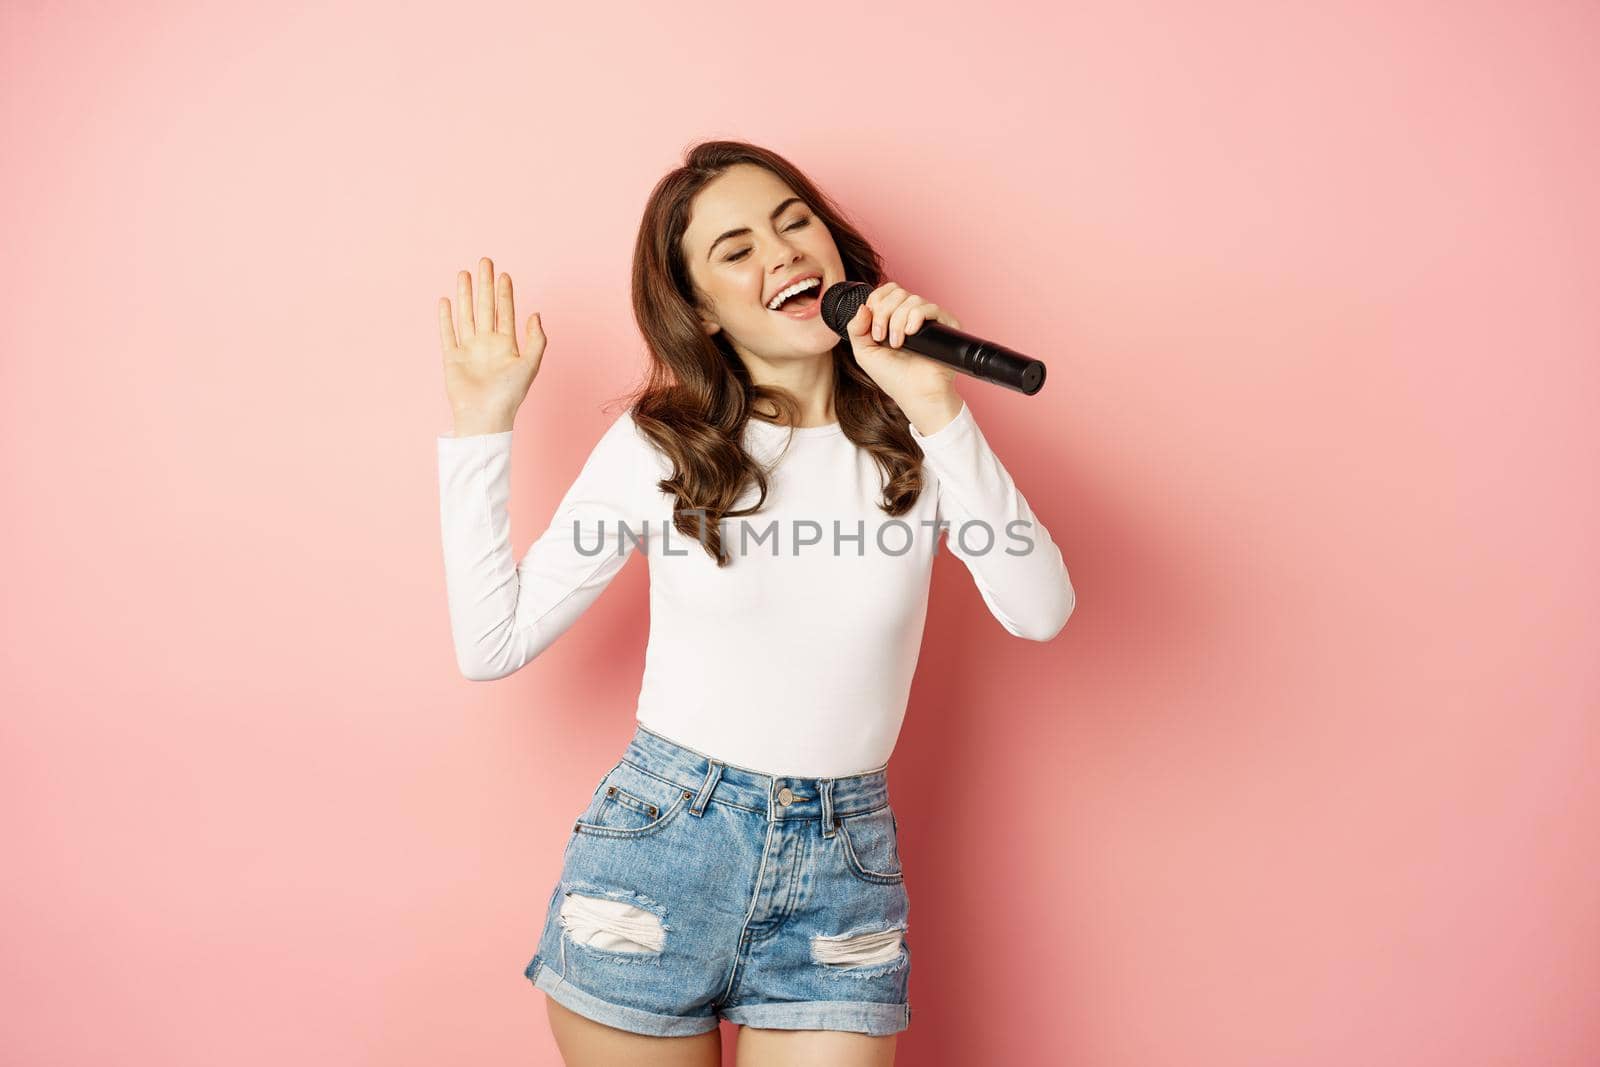 Party girl. Happy young woman singing in microphone, performing song, having fun at event, standing over pink background.